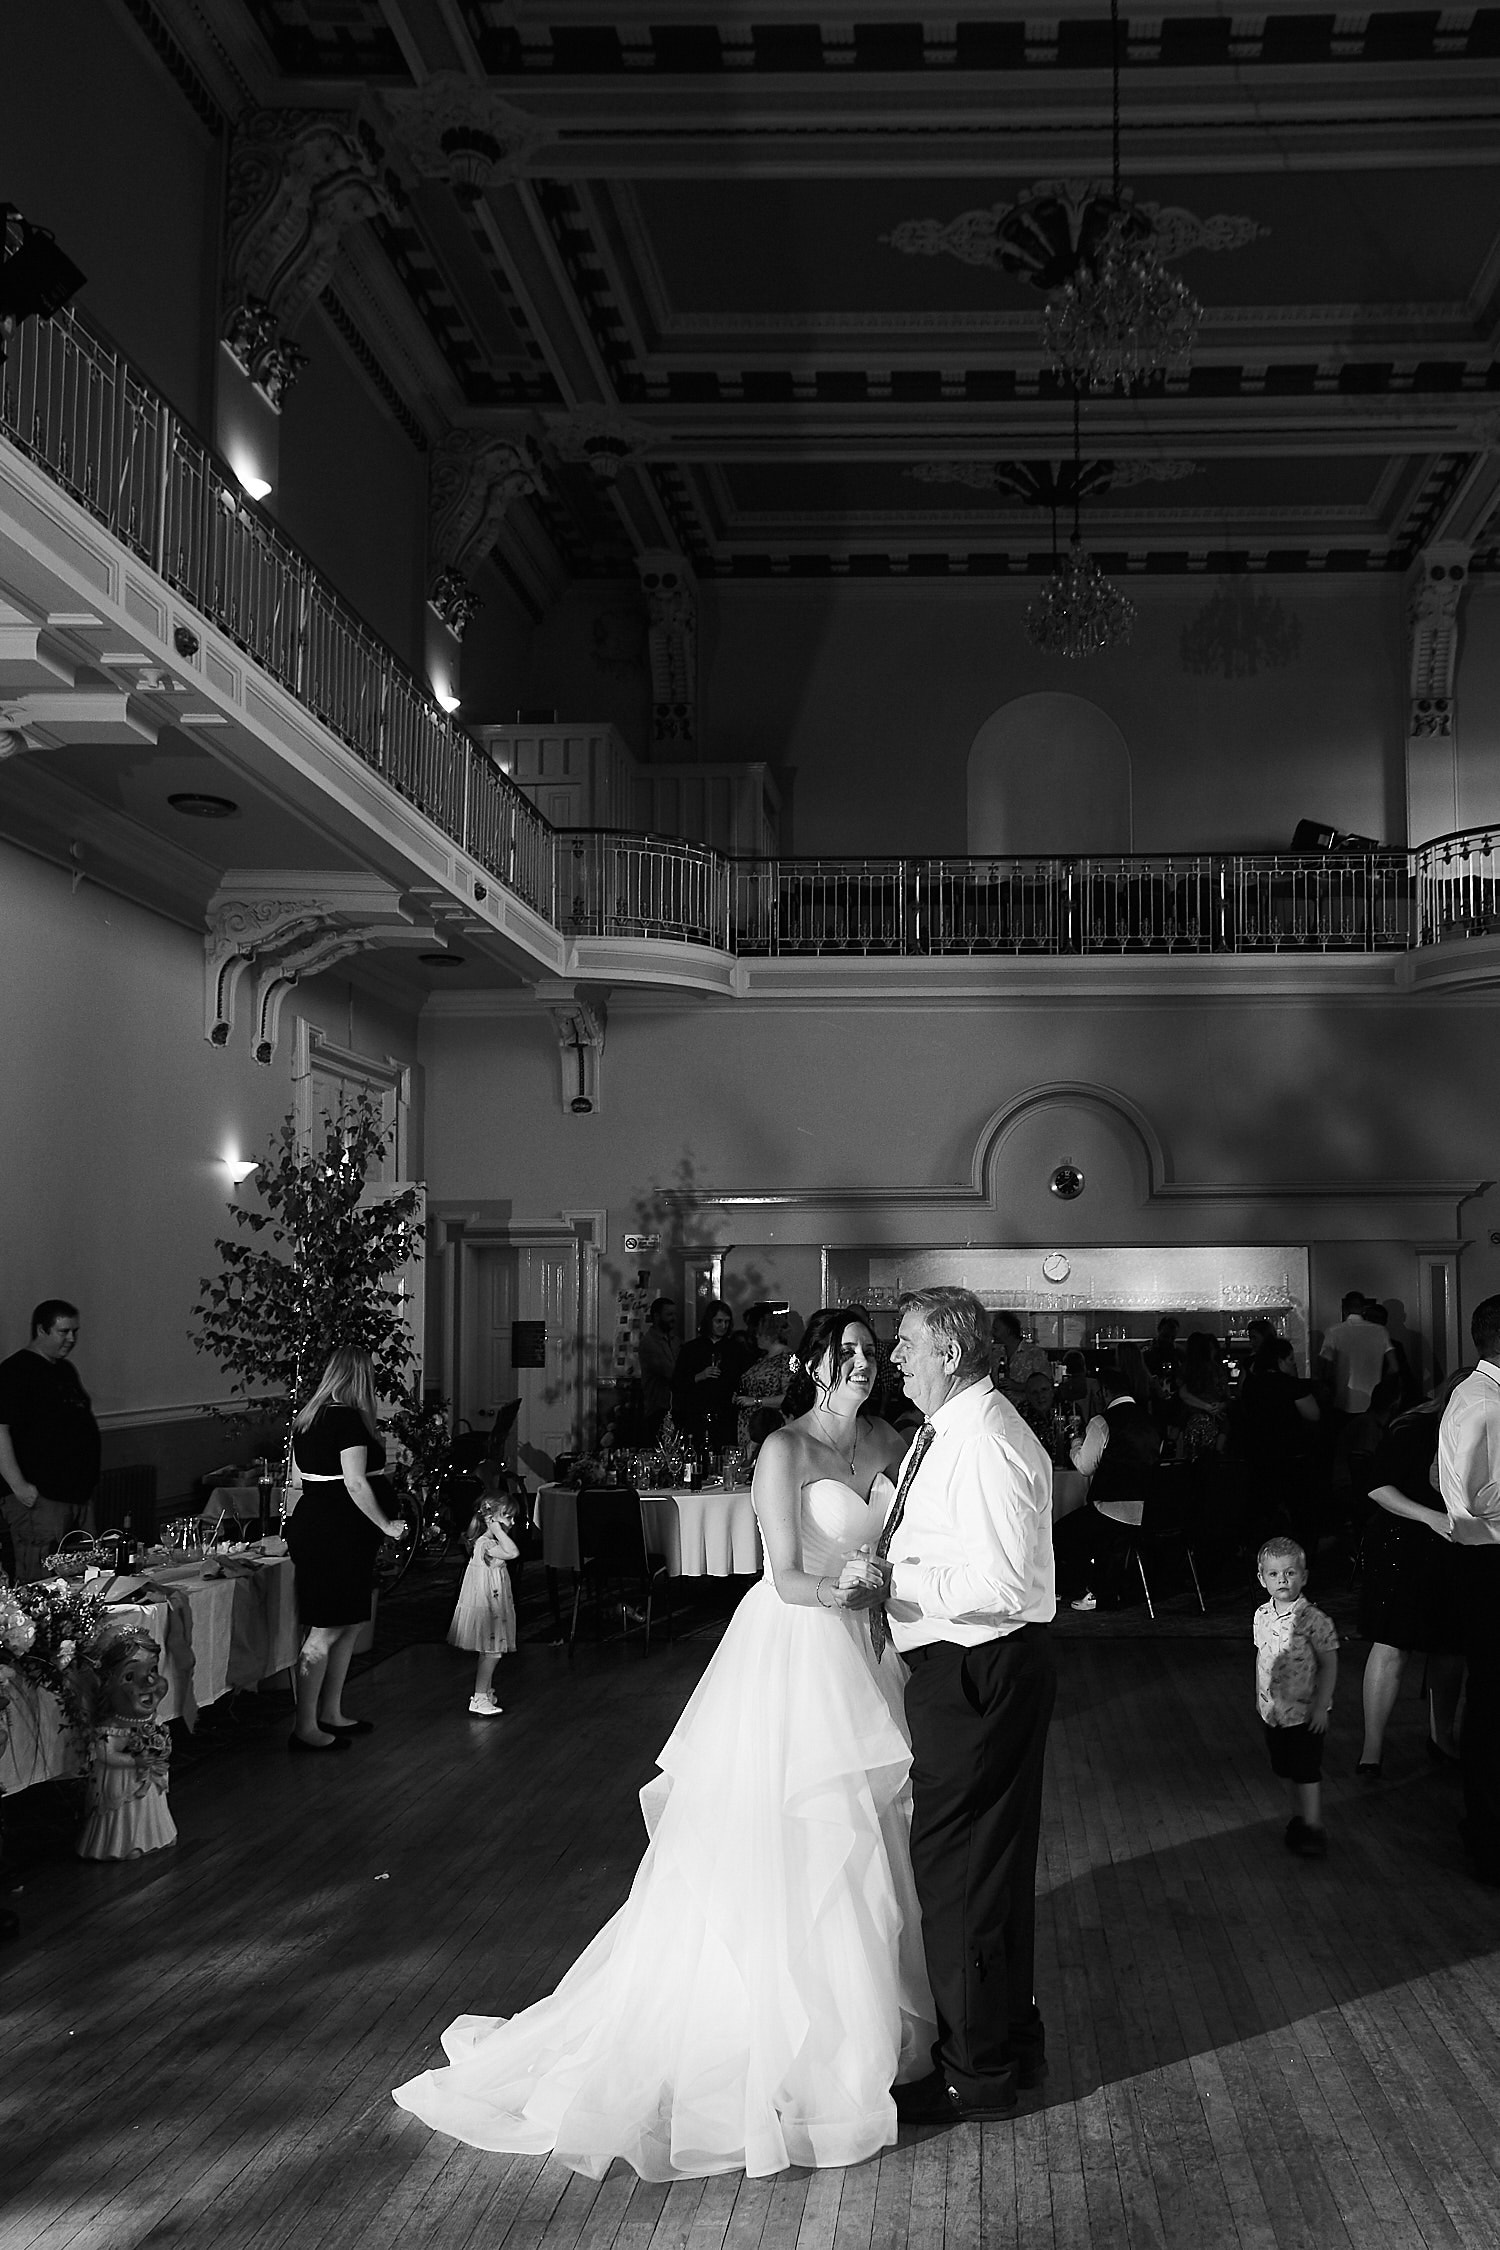 A father and his daughter share a dance on her wedding day